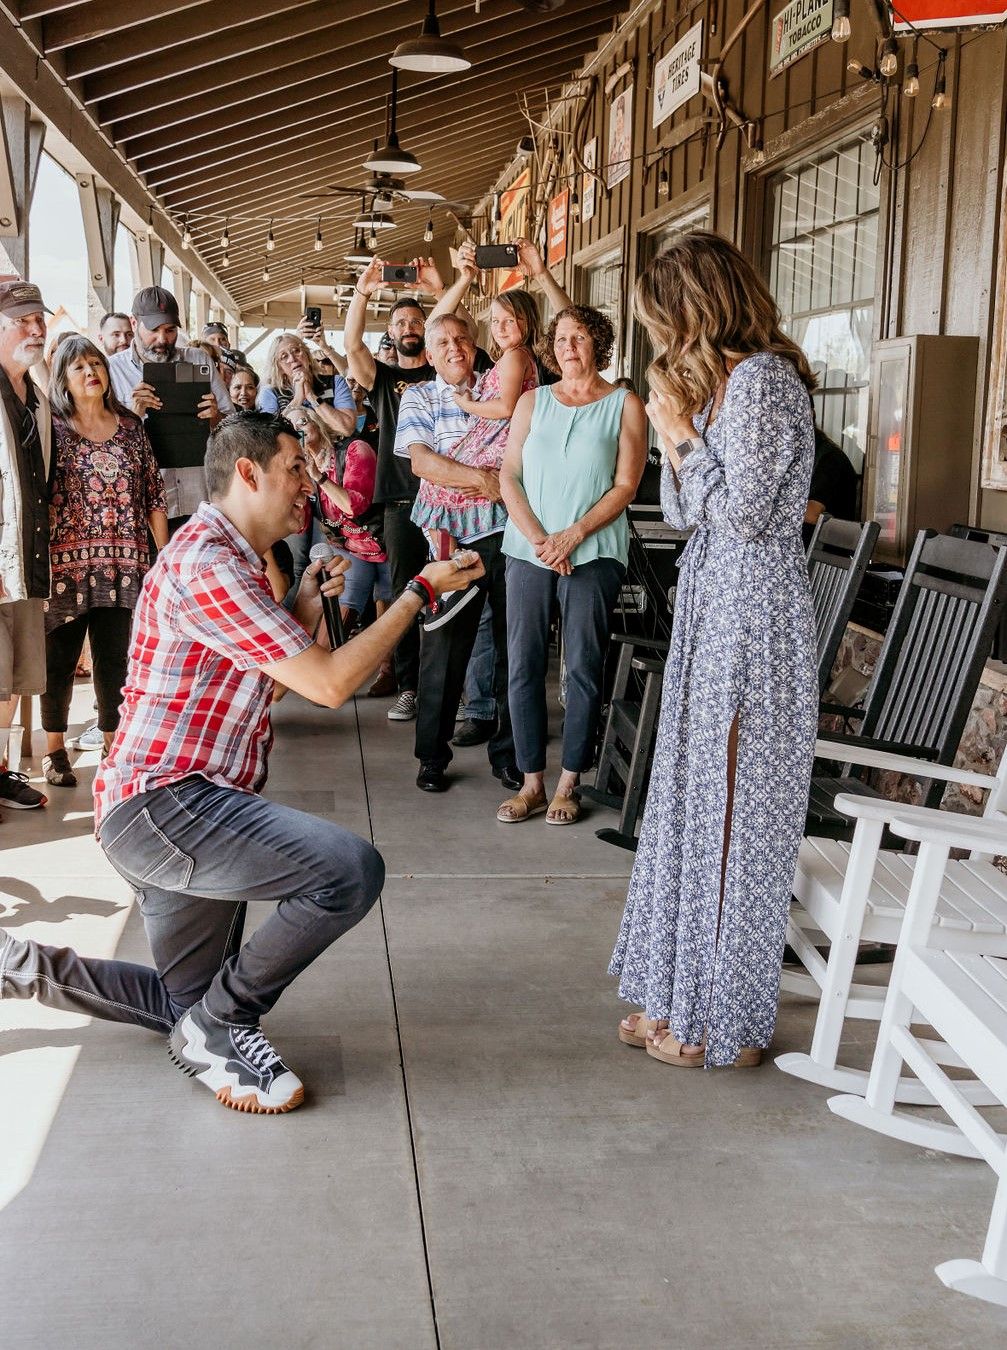 Cracker Barrel Old Country Store Celebrates Care this Valentine's Day and Sweetens the Deal for Couples Who "Pop the Question" at its Restaurants Nationwide